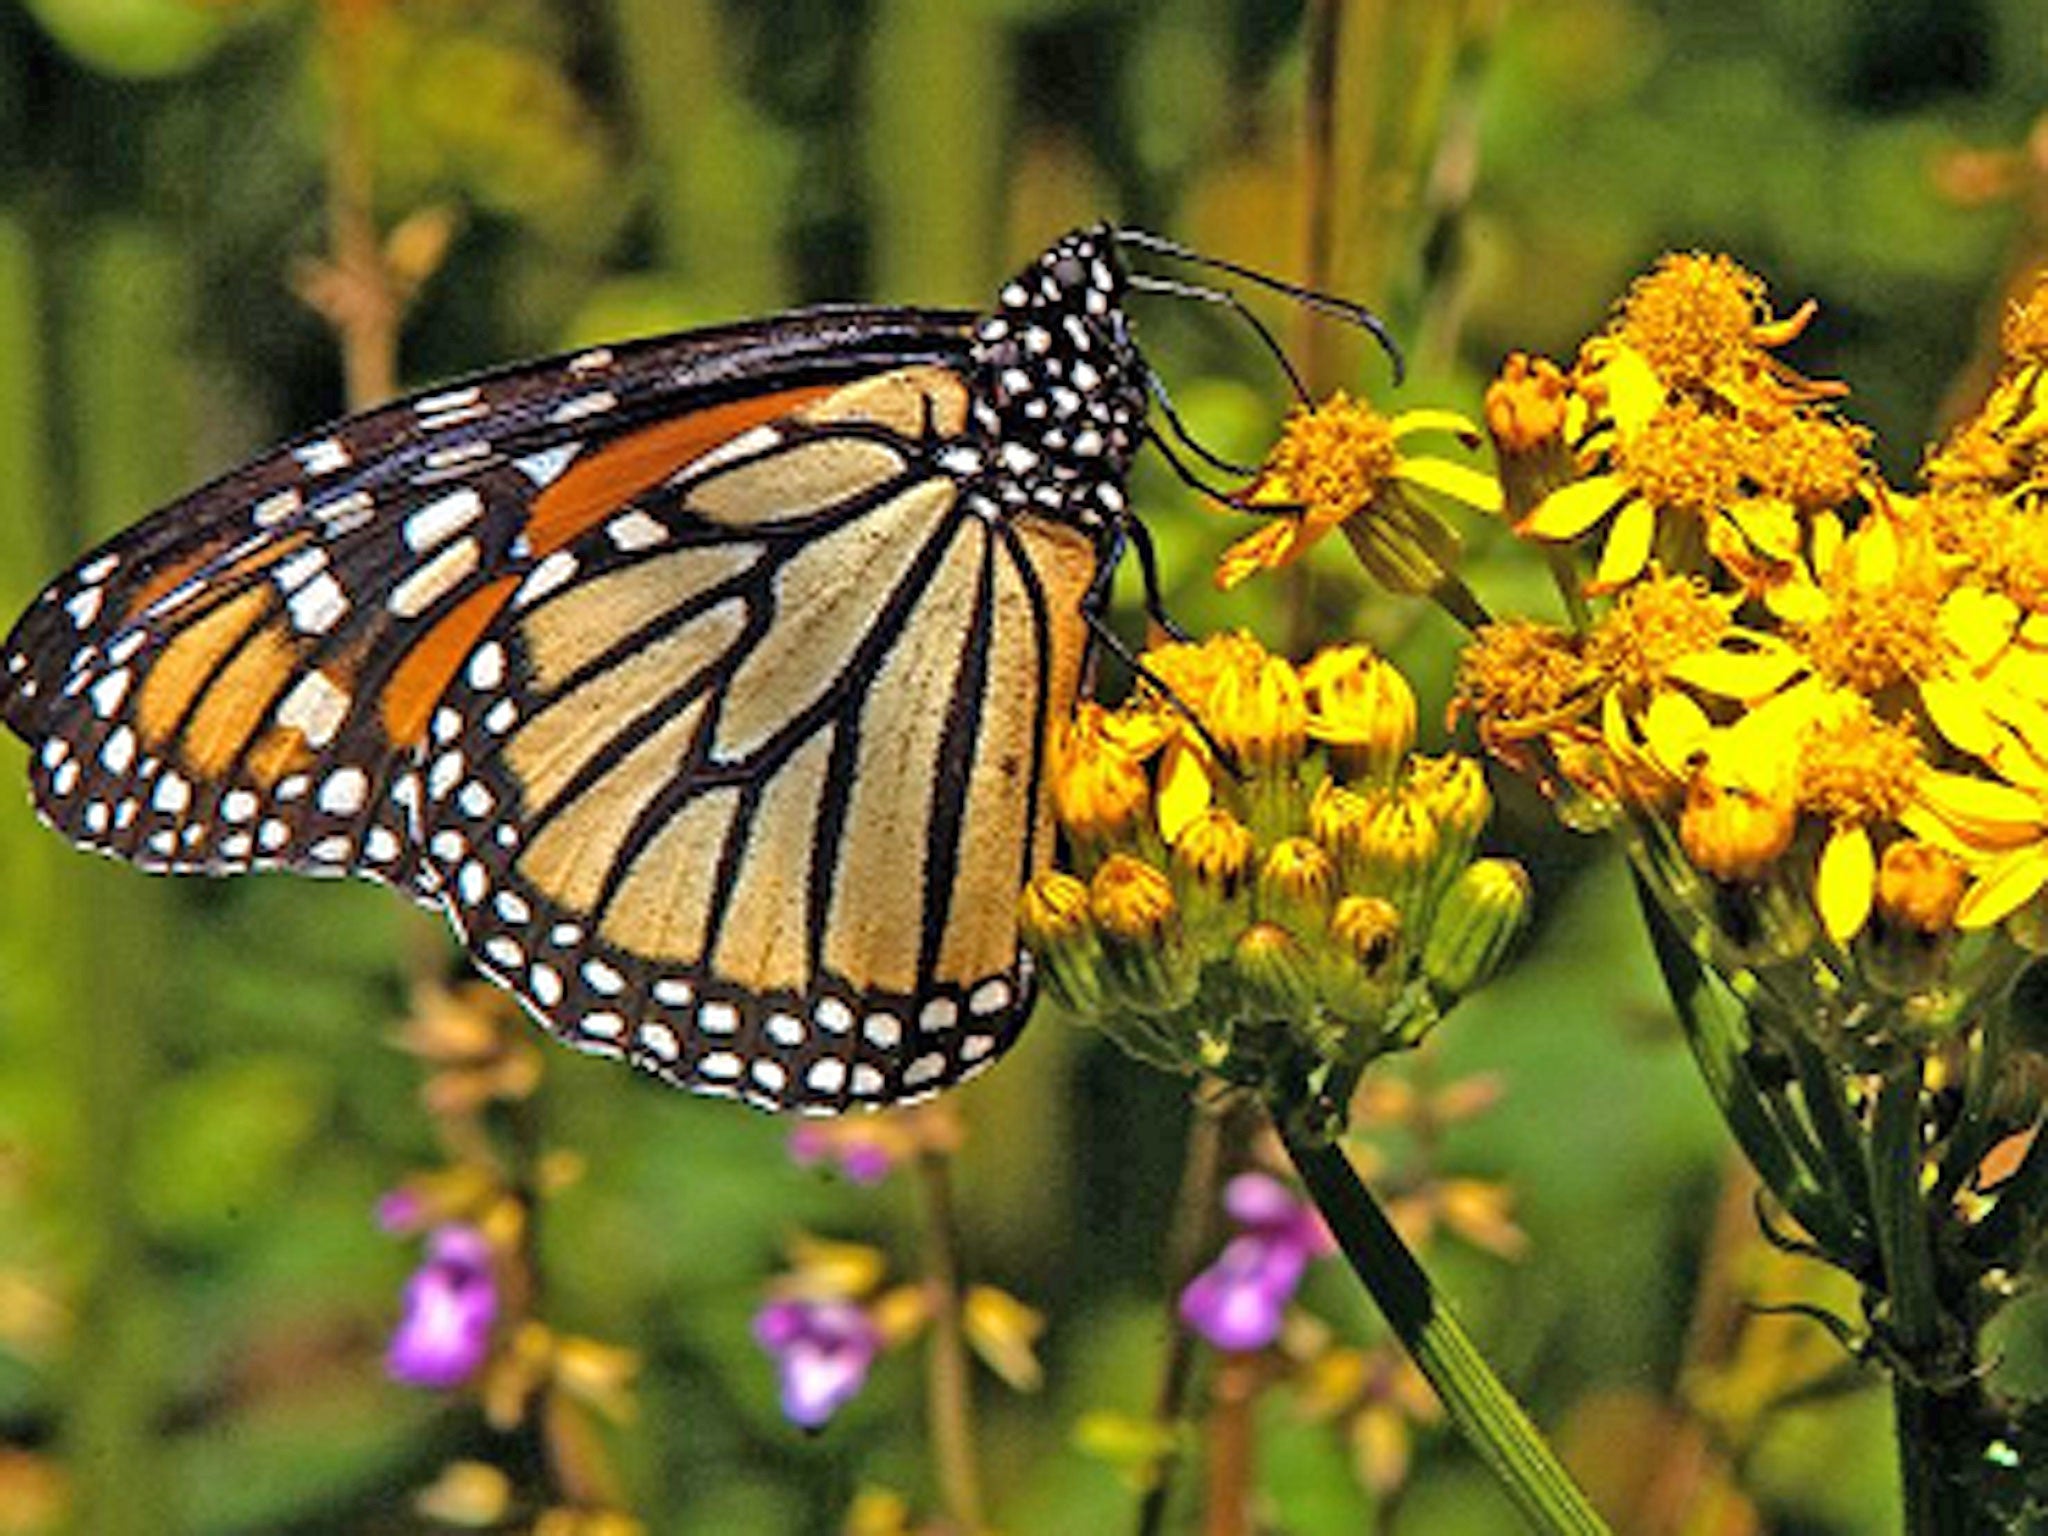 Monarch butterflies are also believed to use landmarks and scent to find their way while migrating